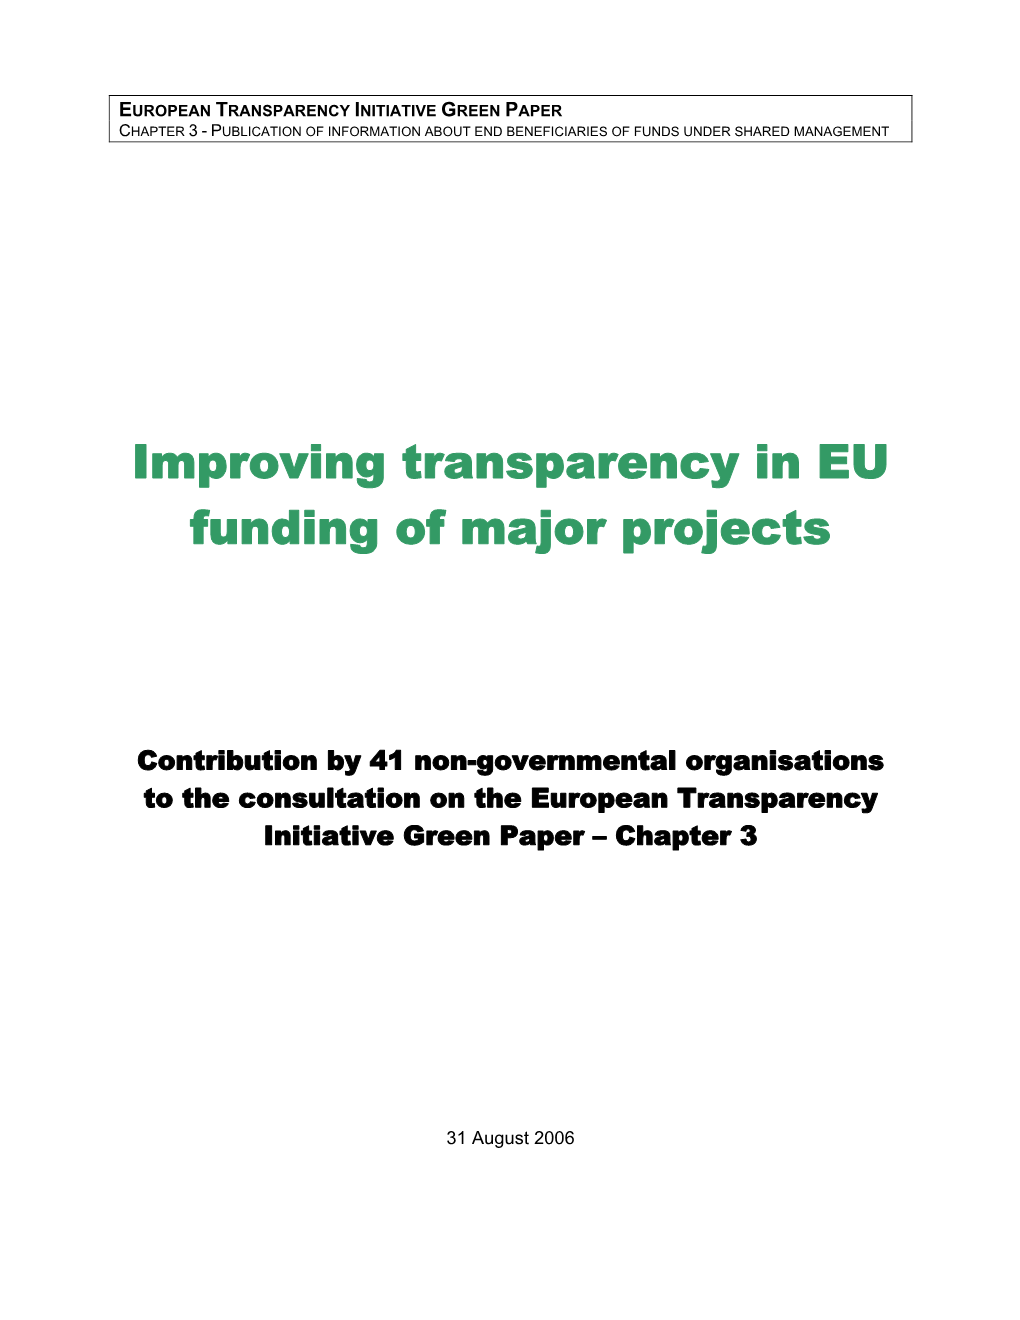 Improving Transparency in EU Funding of Major Projects